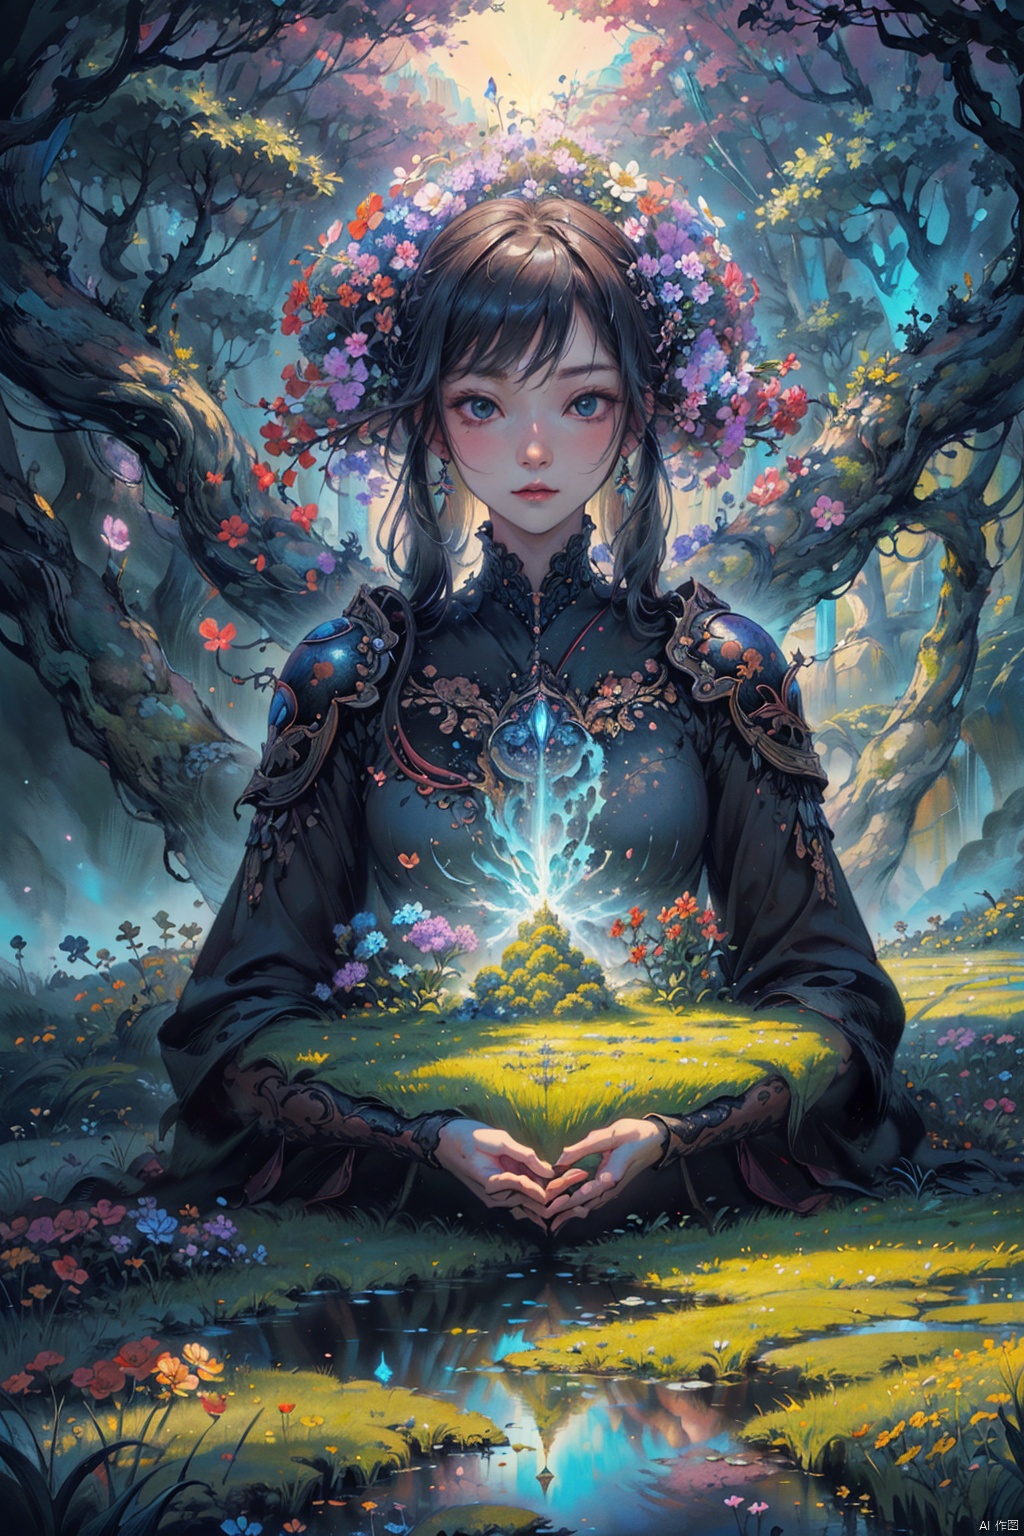 masterpiece,best quality,fantasy,(flowers meadows),Dreamy forest,(magic world),dindal light,CONTRAST,illustration,art,the inception,surrealism,rice paddy
